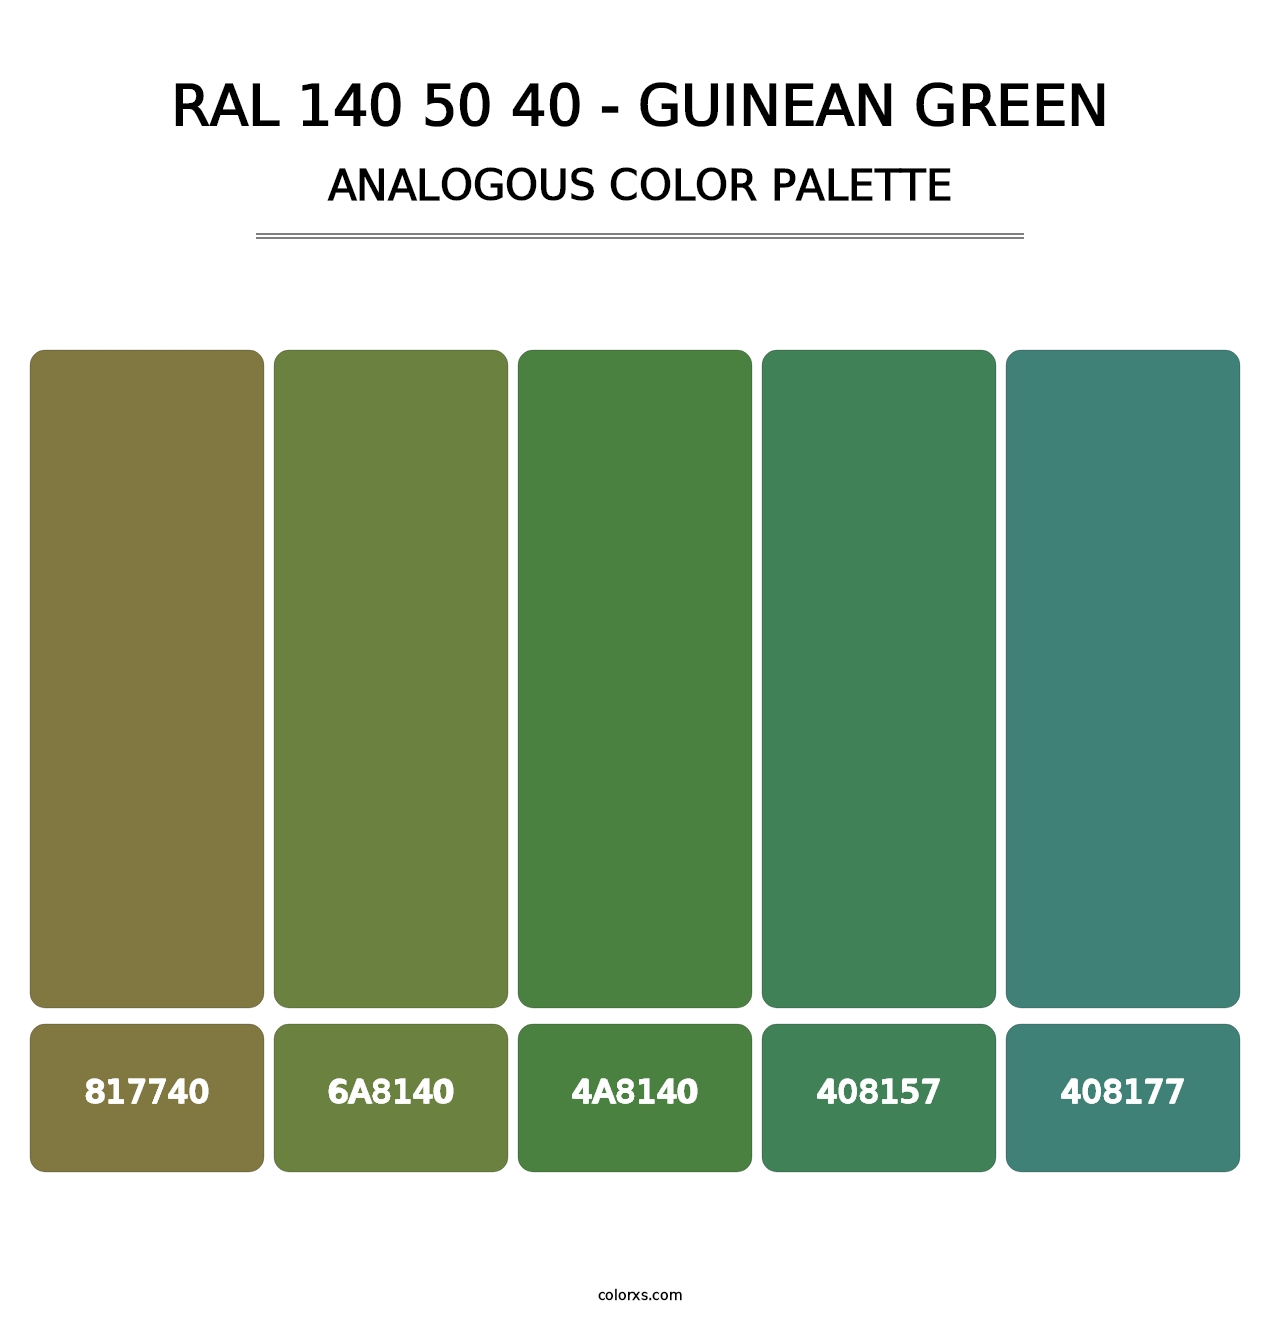 RAL 140 50 40 - Guinean Green - Analogous Color Palette